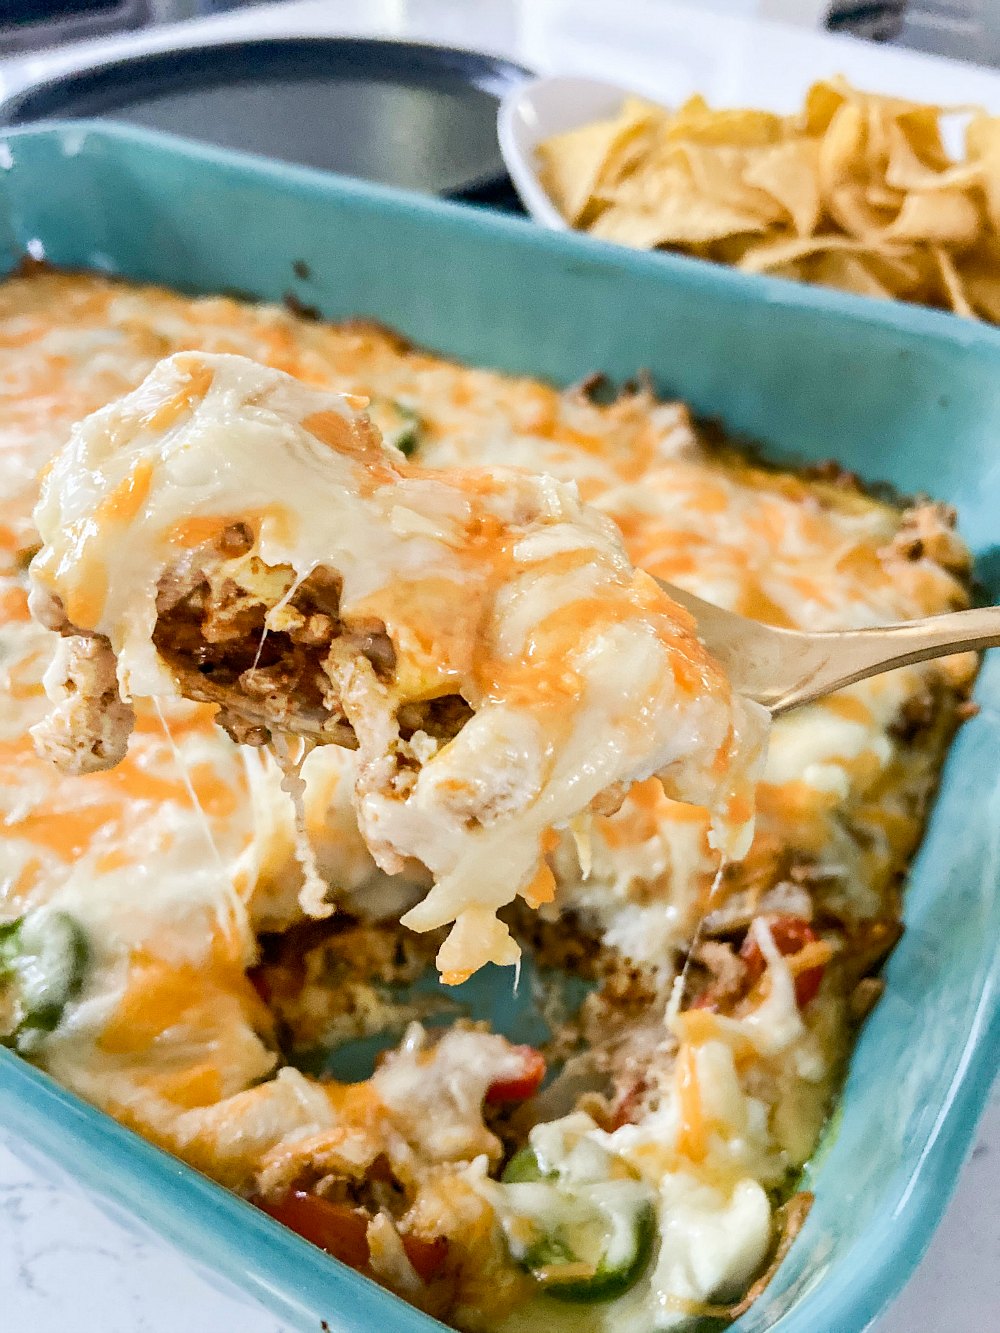 Low Carb Cheesy Taco Bake - Keto. A cheesy keto taco casserole that is the perfect topping over salads for you and over chips for your kids! All of the taste of tacos with a fractions of the carbs! 